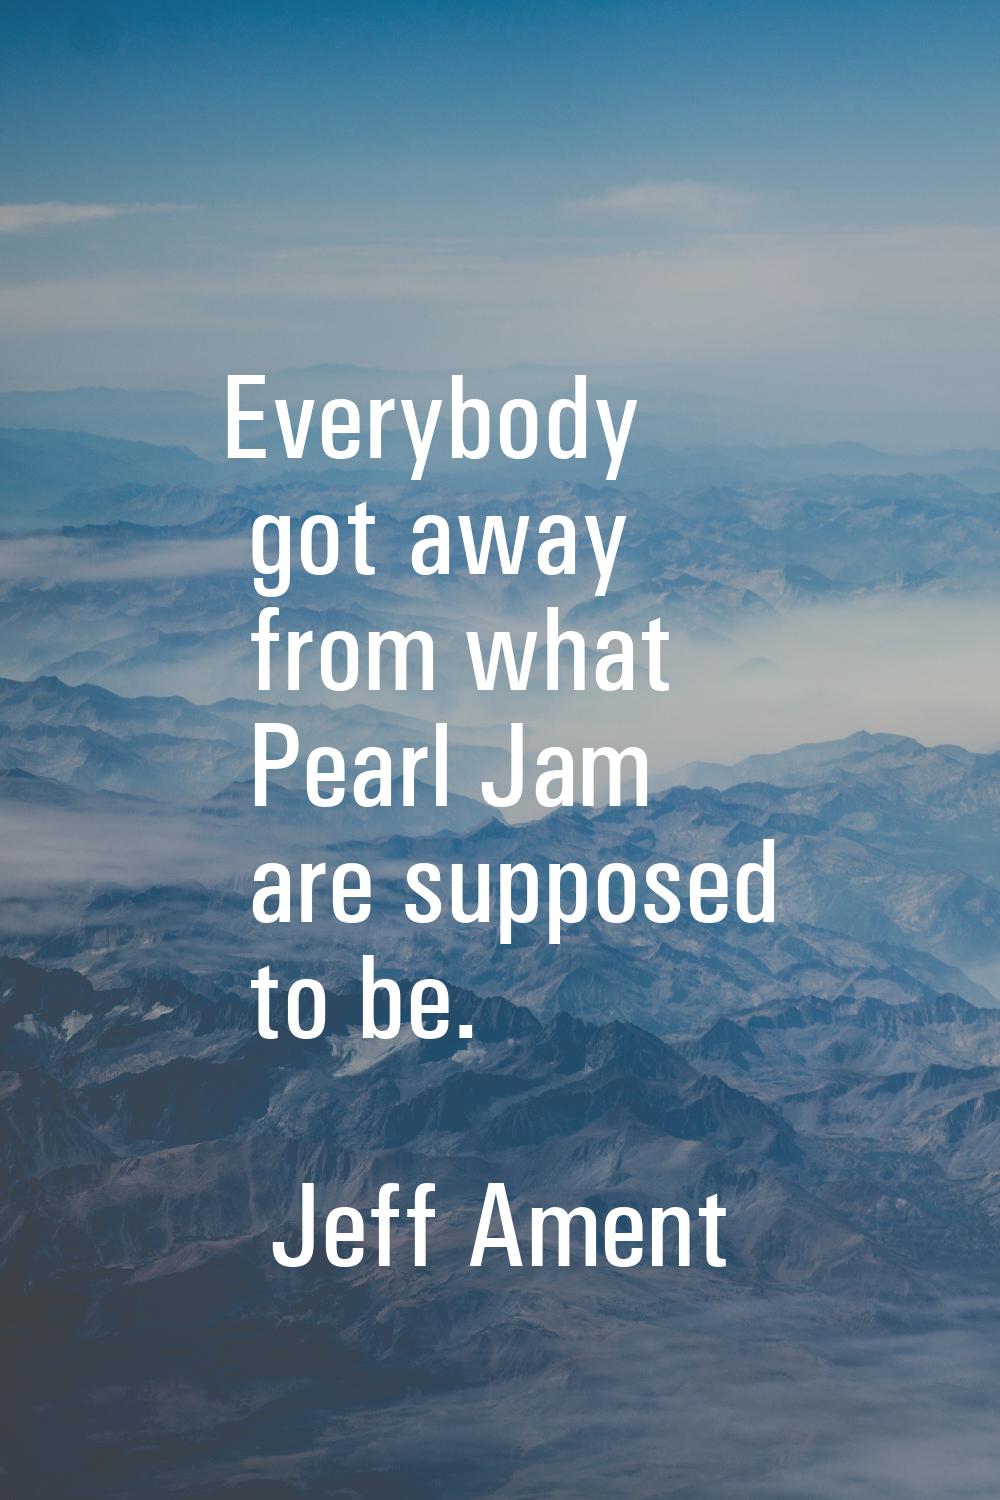 Everybody got away from what Pearl Jam are supposed to be.